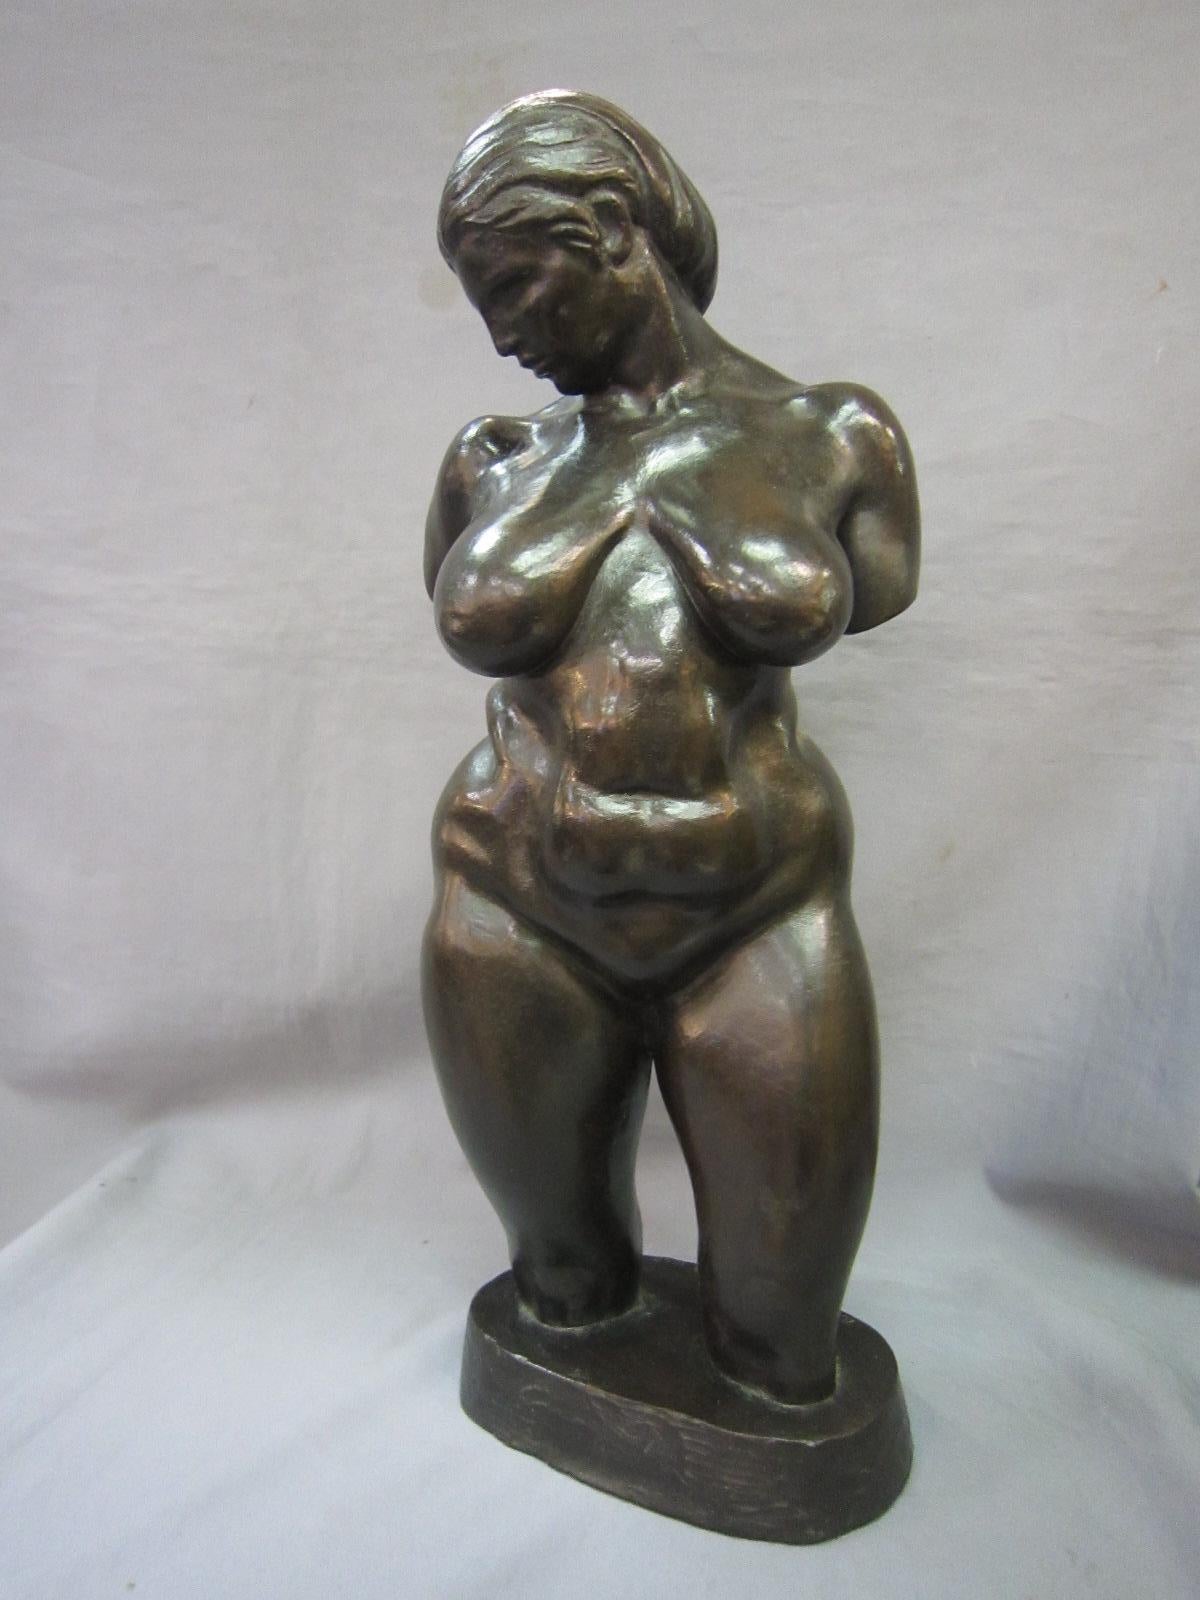 A fabulous original bronze sculpture of a voluptuous nude woman standing,
signed Brenda Putnam 1928, Kunst foundry 
This statue of a nude torso sculpted by a highly skilled female sculptor, displays a sense of grace and beauty. The soft curves of